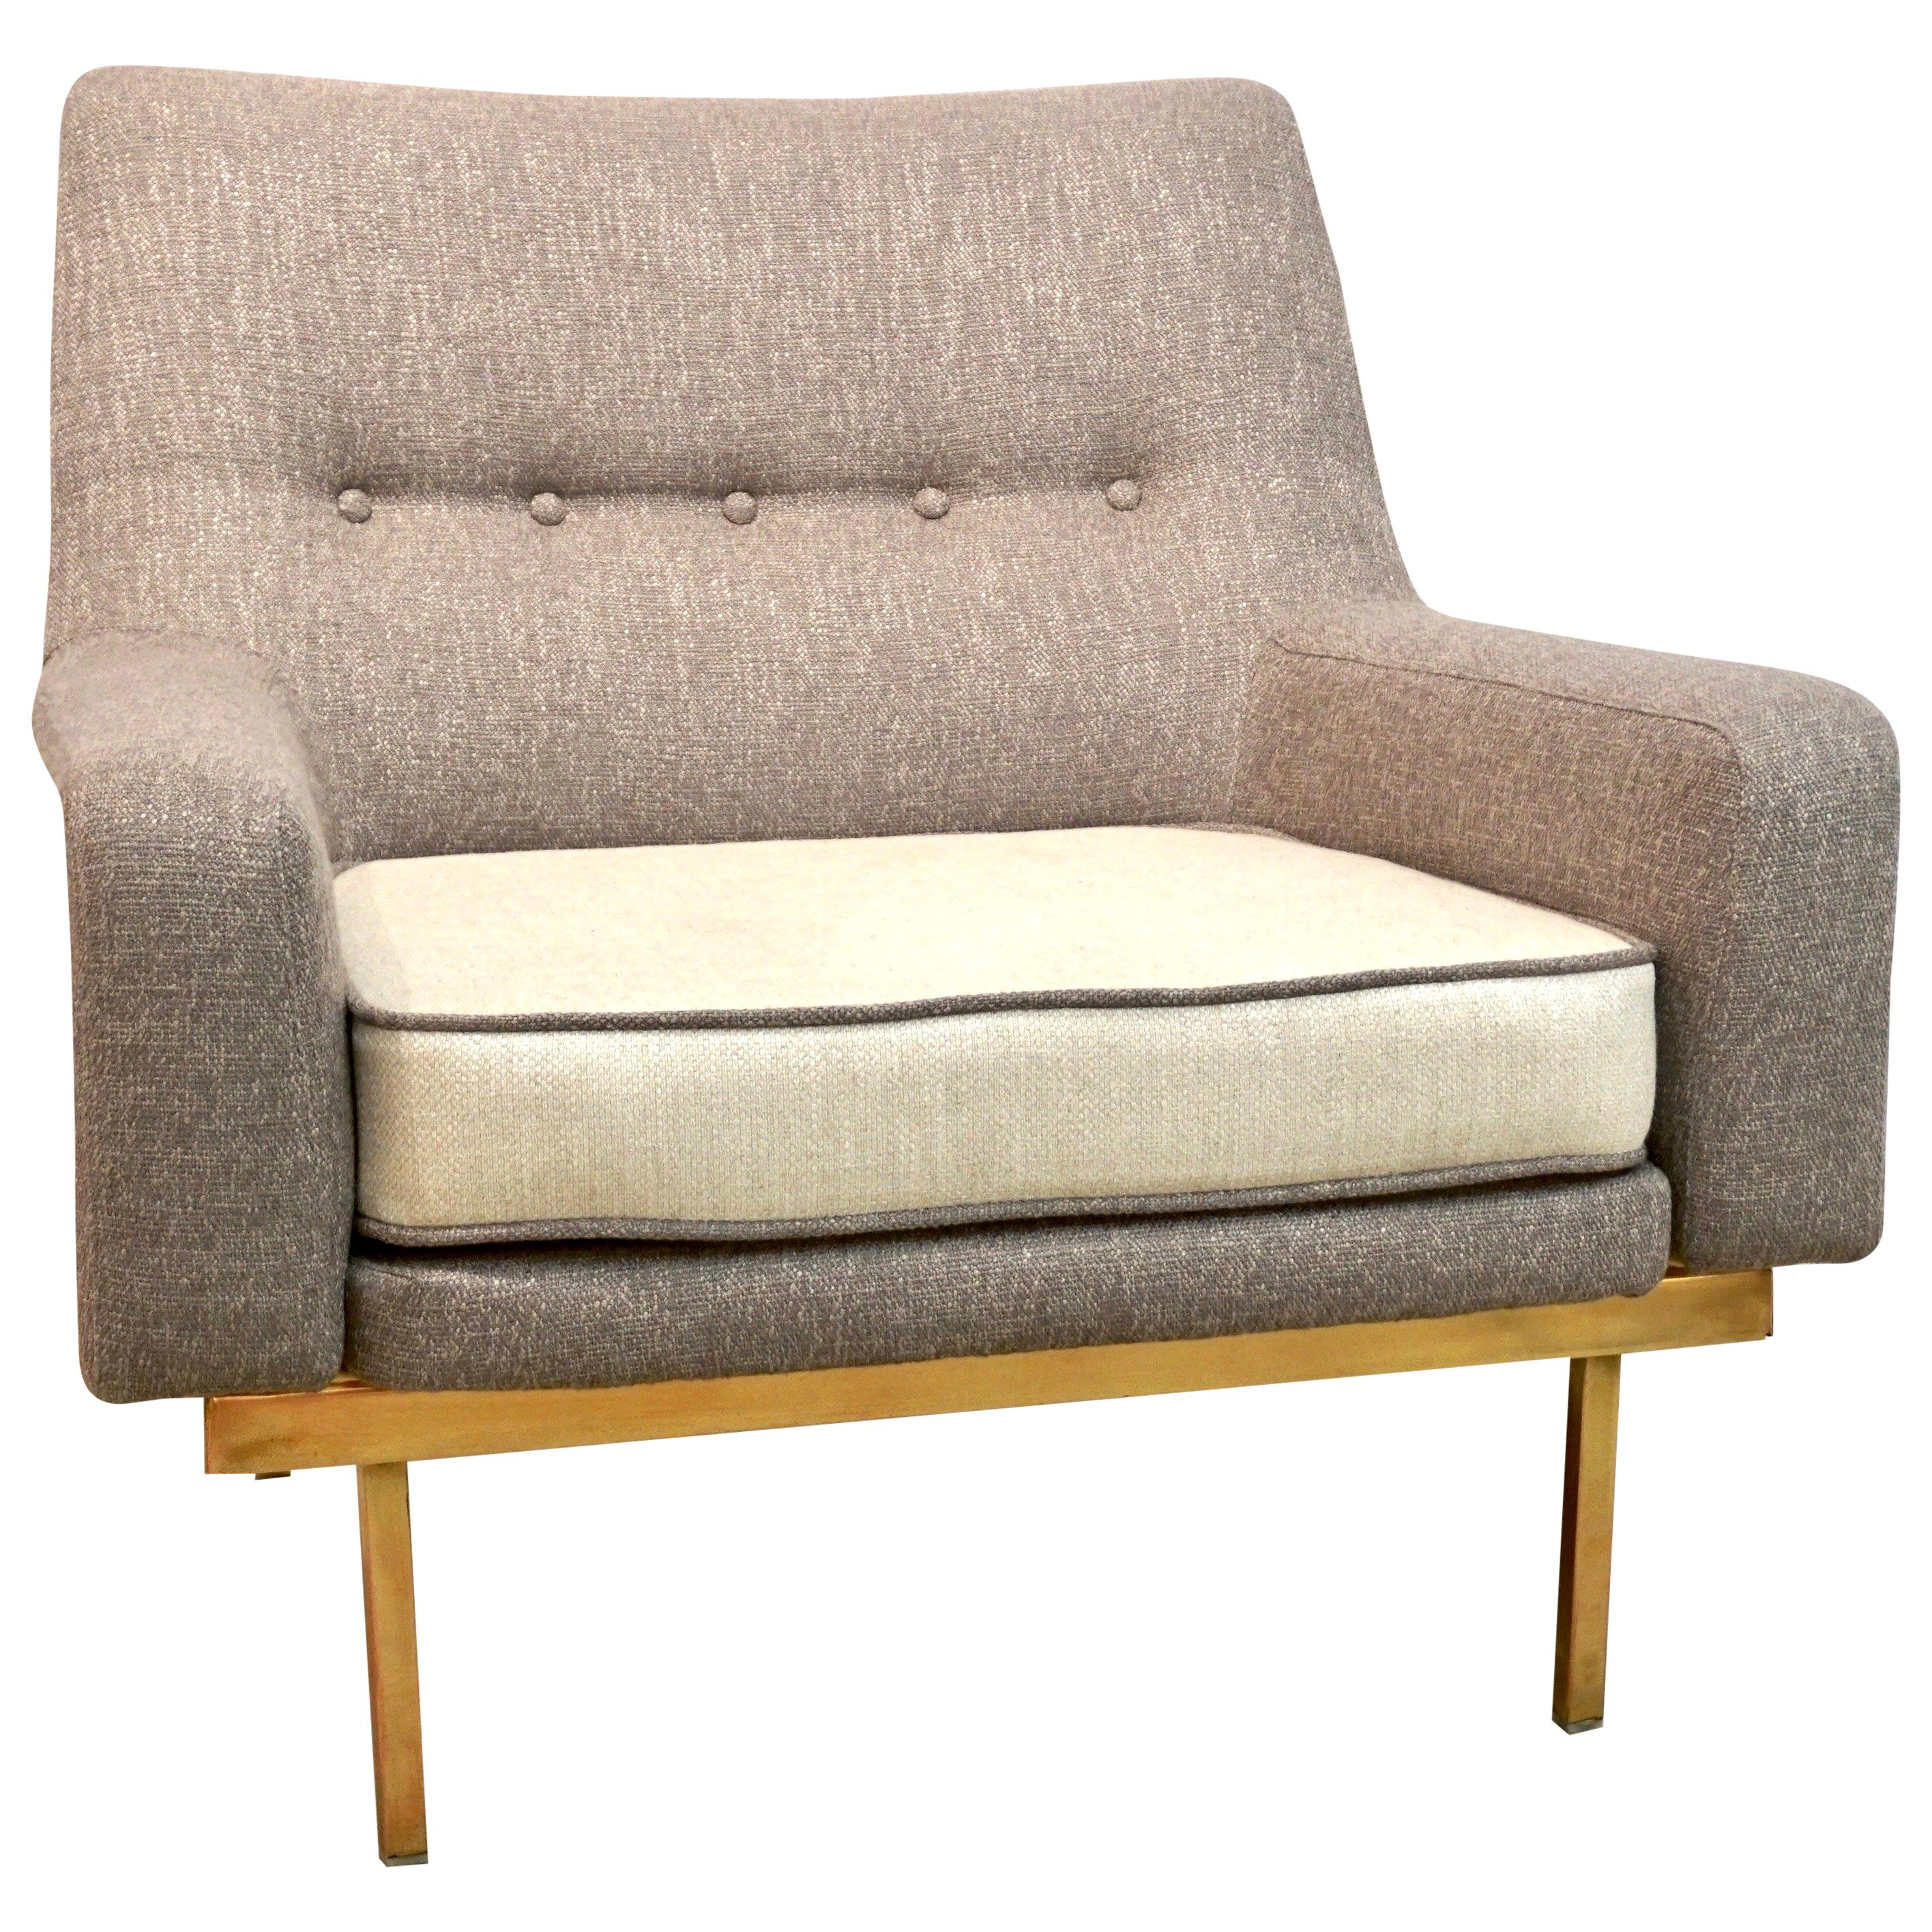 1970s Arflex Italian Brass Base Two-Tone Pepper Cream and Taupe Gray Armchair